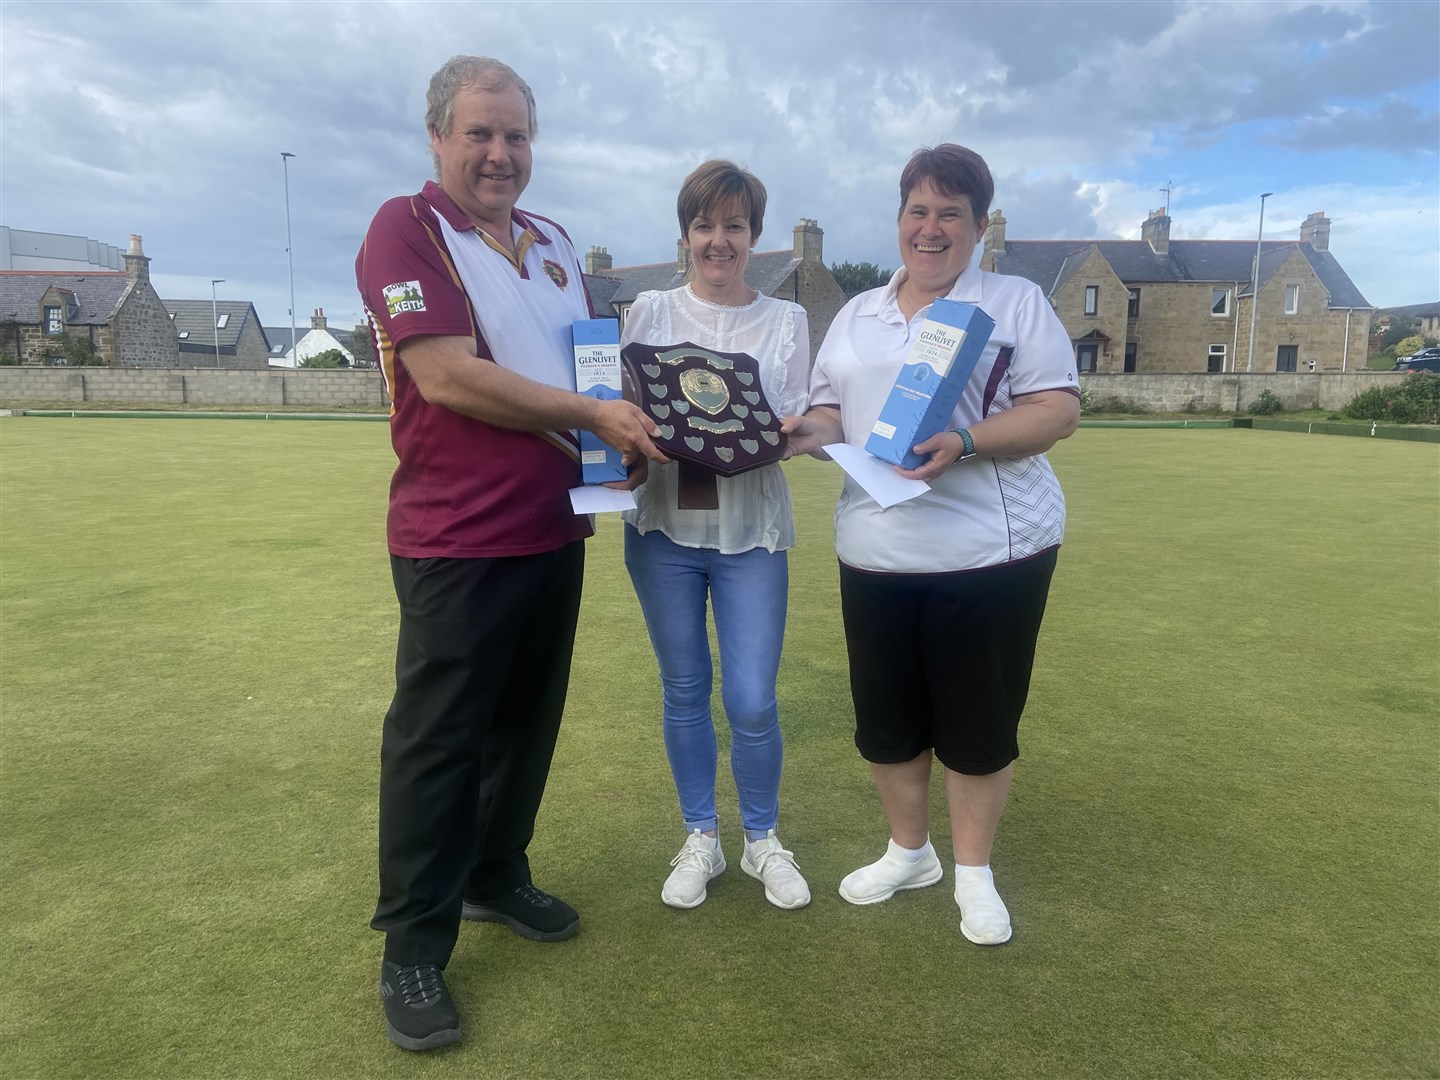 Keith Bowling Club pair Davie Bell and Karen Dalgarno receive the Murray Cormie Memorial Pairs Trophy from Audrey Christie at Burghead's St Aethan's Bowling Club.